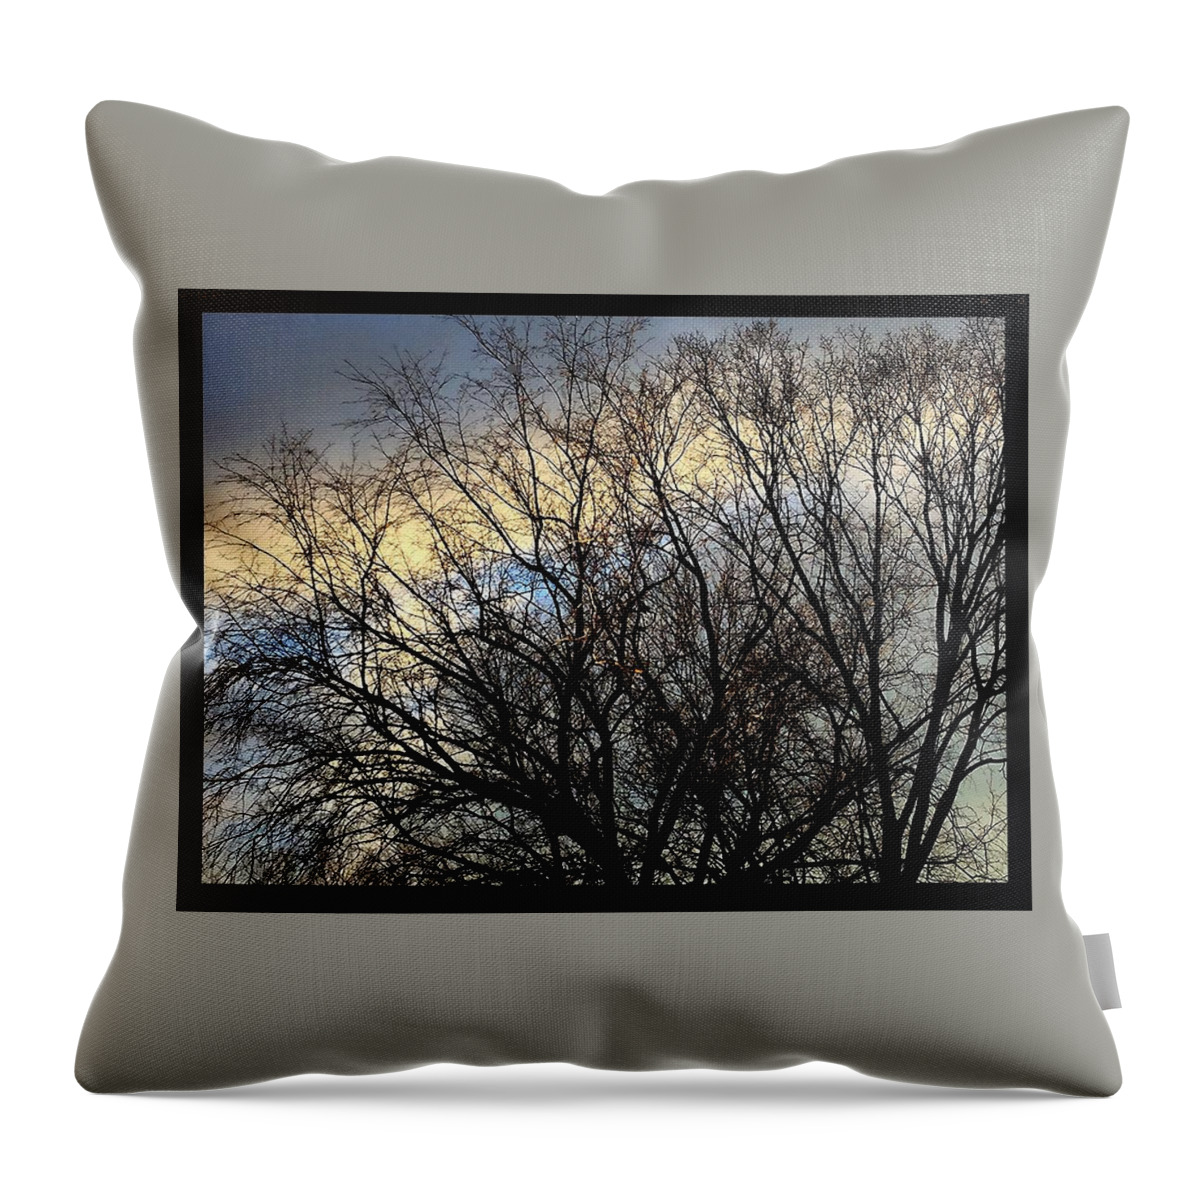 Fankjcasella Throw Pillow featuring the photograph Patterns In The Sky by Frank J Casella